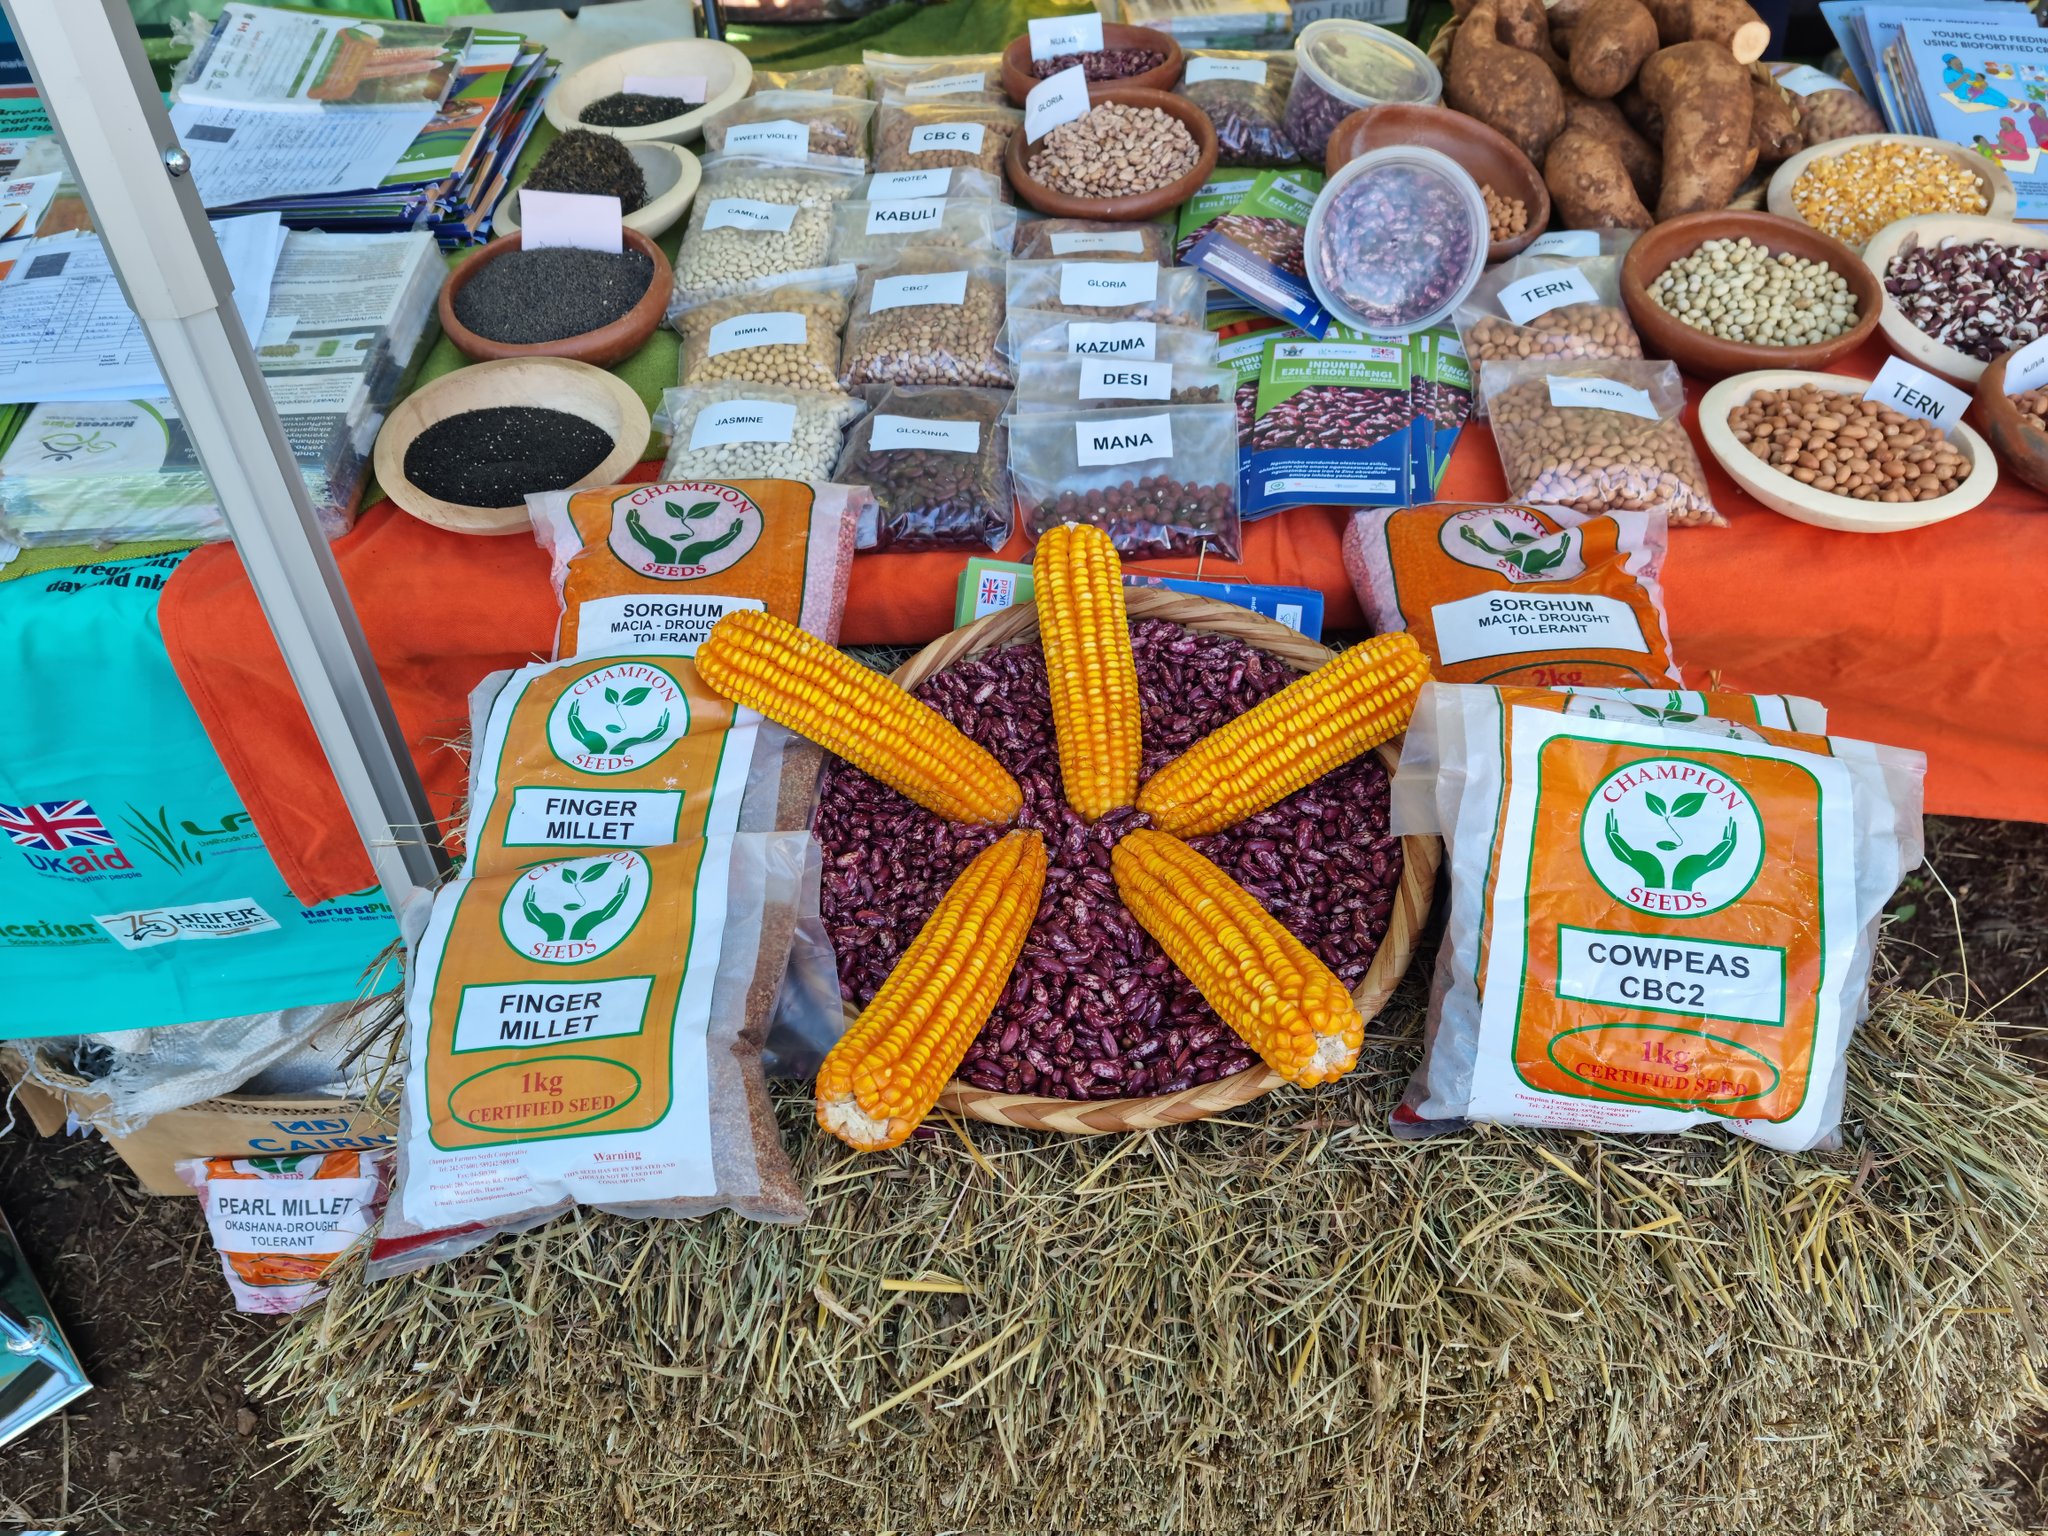 ‘My Food is African’ campaign launched at the National Seed Fair